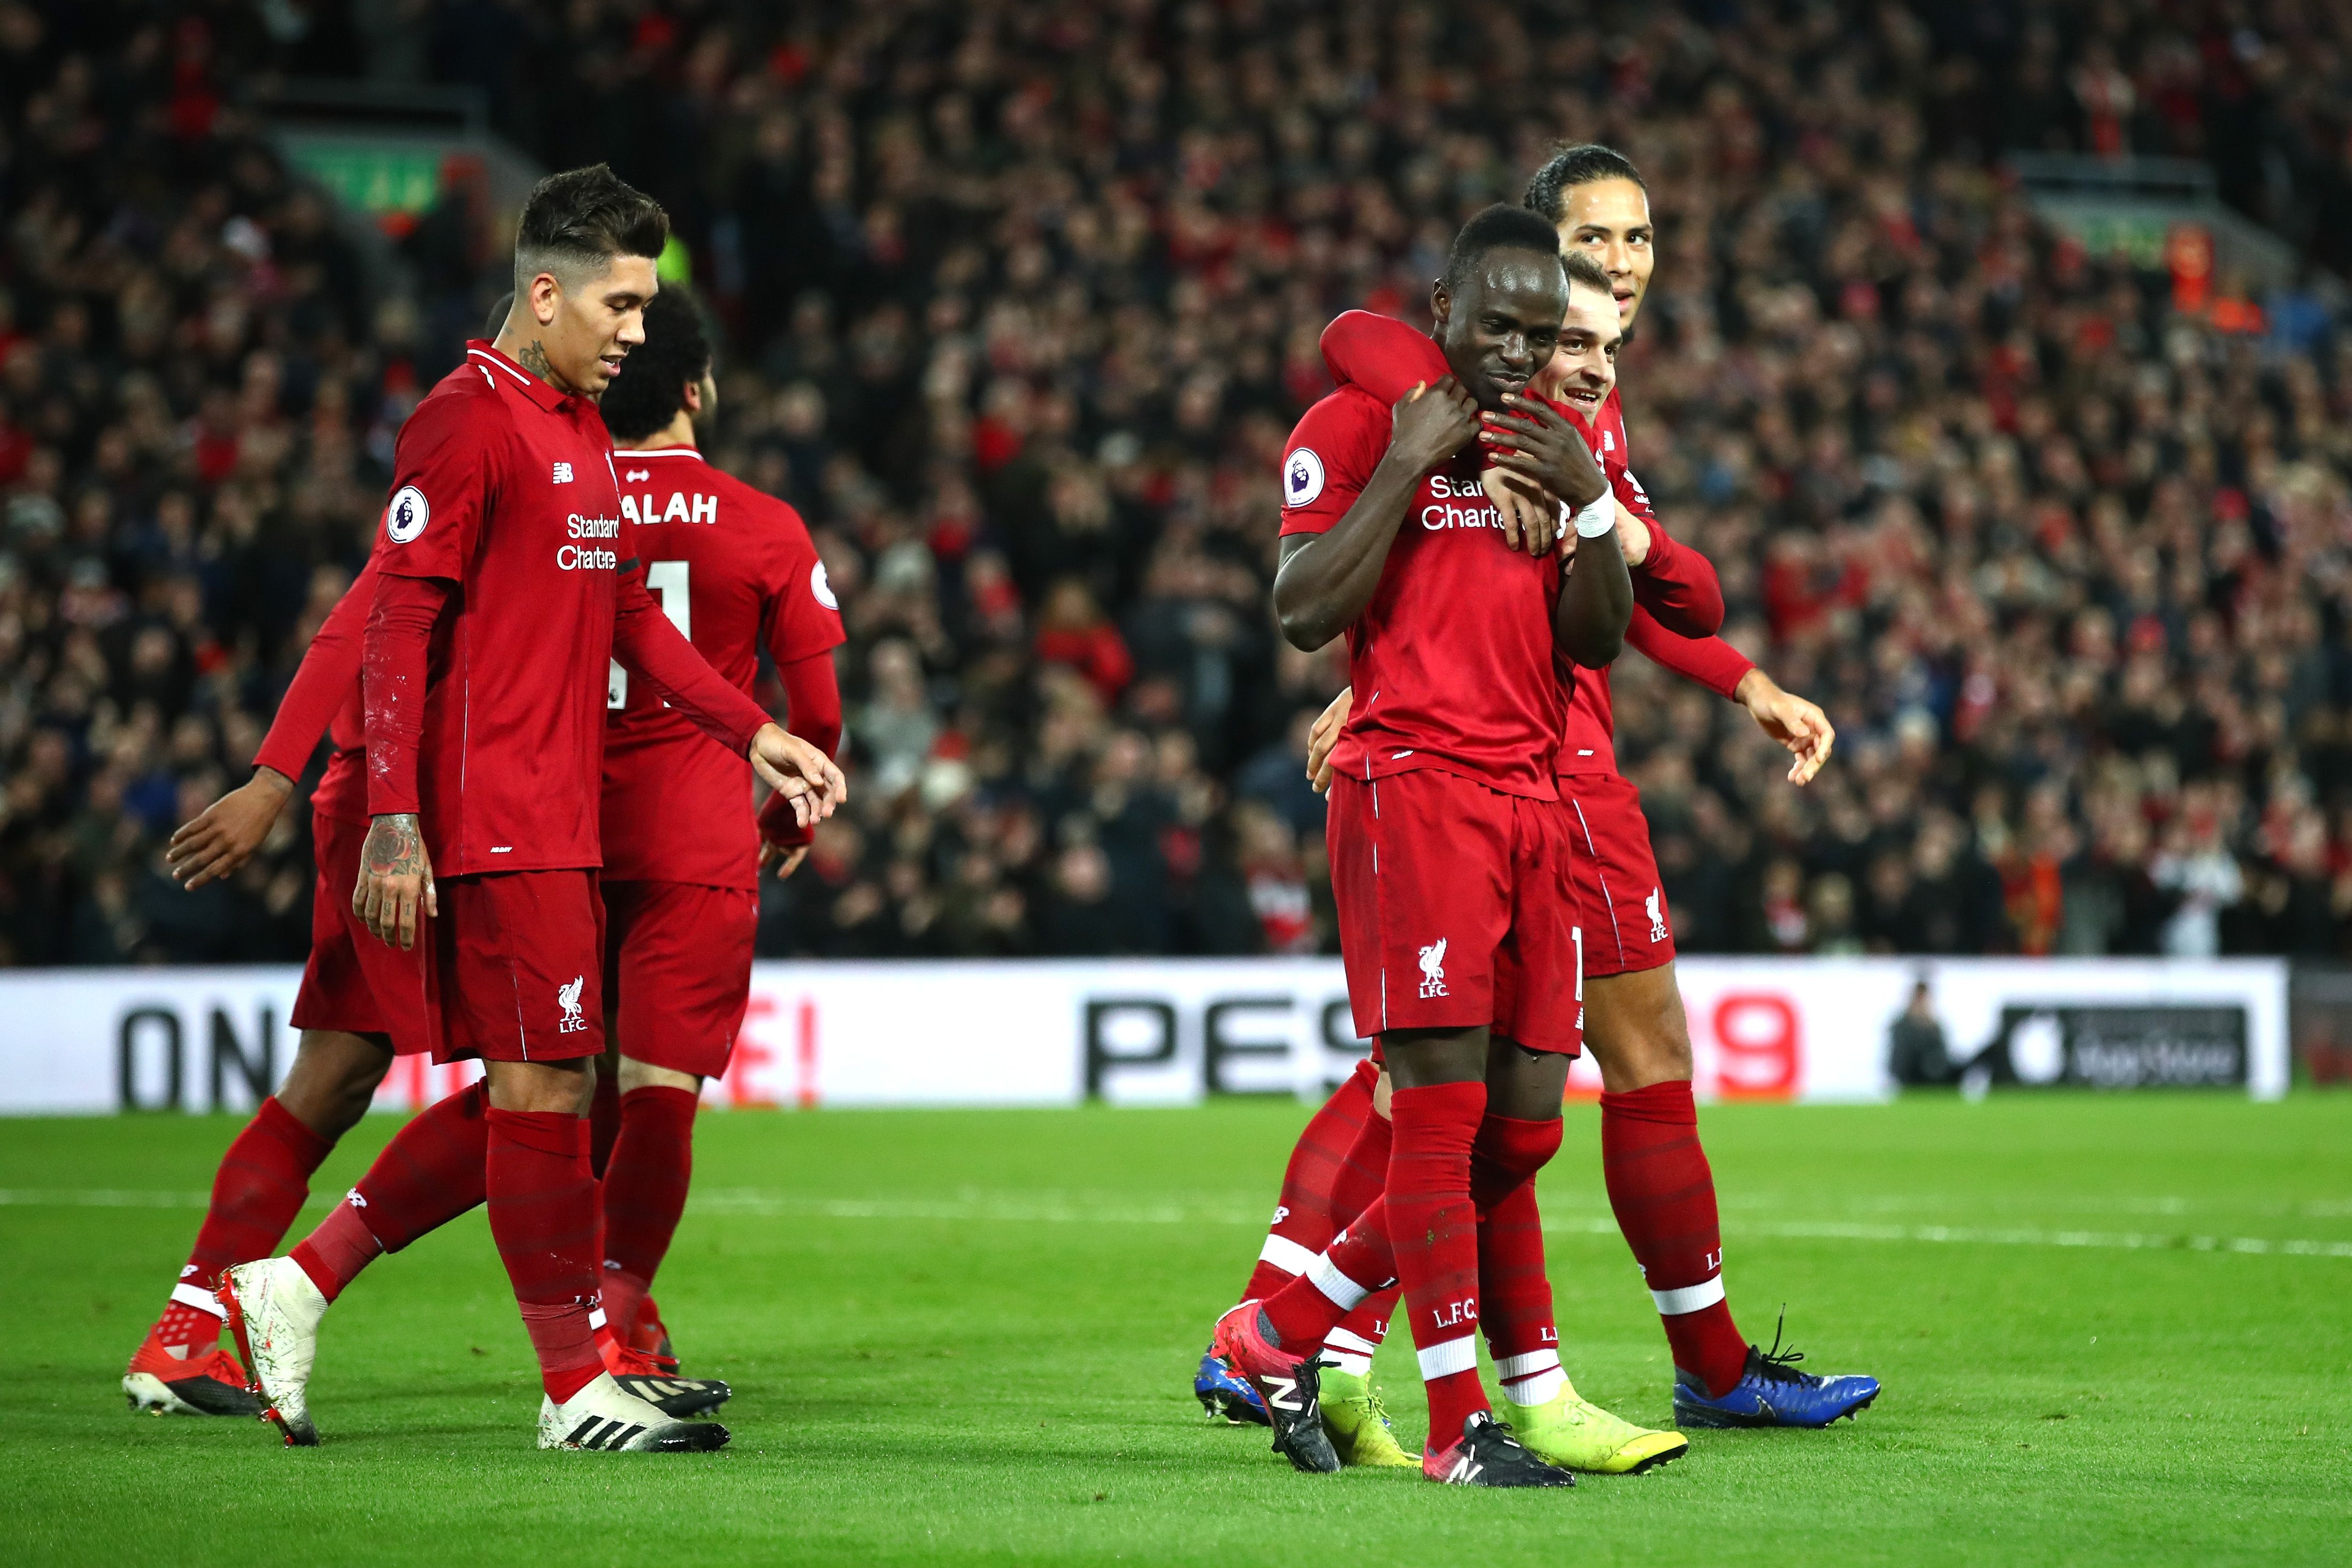 LIVERPOOL, ENGLAND - DECEMBER 29: Sadio Mane of Liverpool celebrates with team mates after scoring his sides third goal during the Premier League match between Liverpool FC and Arsenal FC at Anfield on December 29, 2018 in Liverpool, United Kingdom. (Photo by Clive Brunskill/Getty Images)